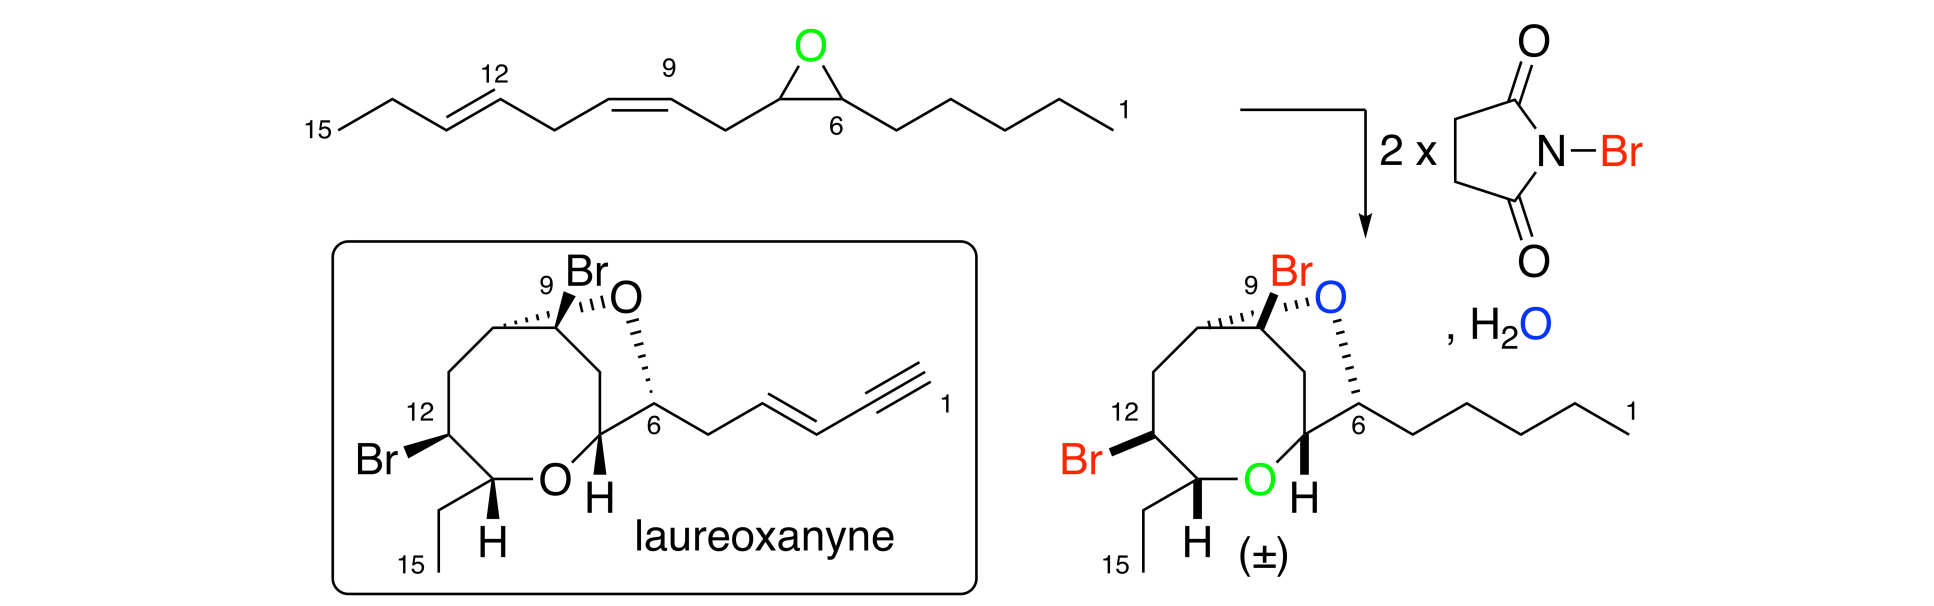 Summary scheme for paper: Proof-of-Principle Direct Double Cyclisation of a Linear C15-Precursor to a Dibrominated Bicyclic Medium-Ring Ether Relevant to Laurencia Species